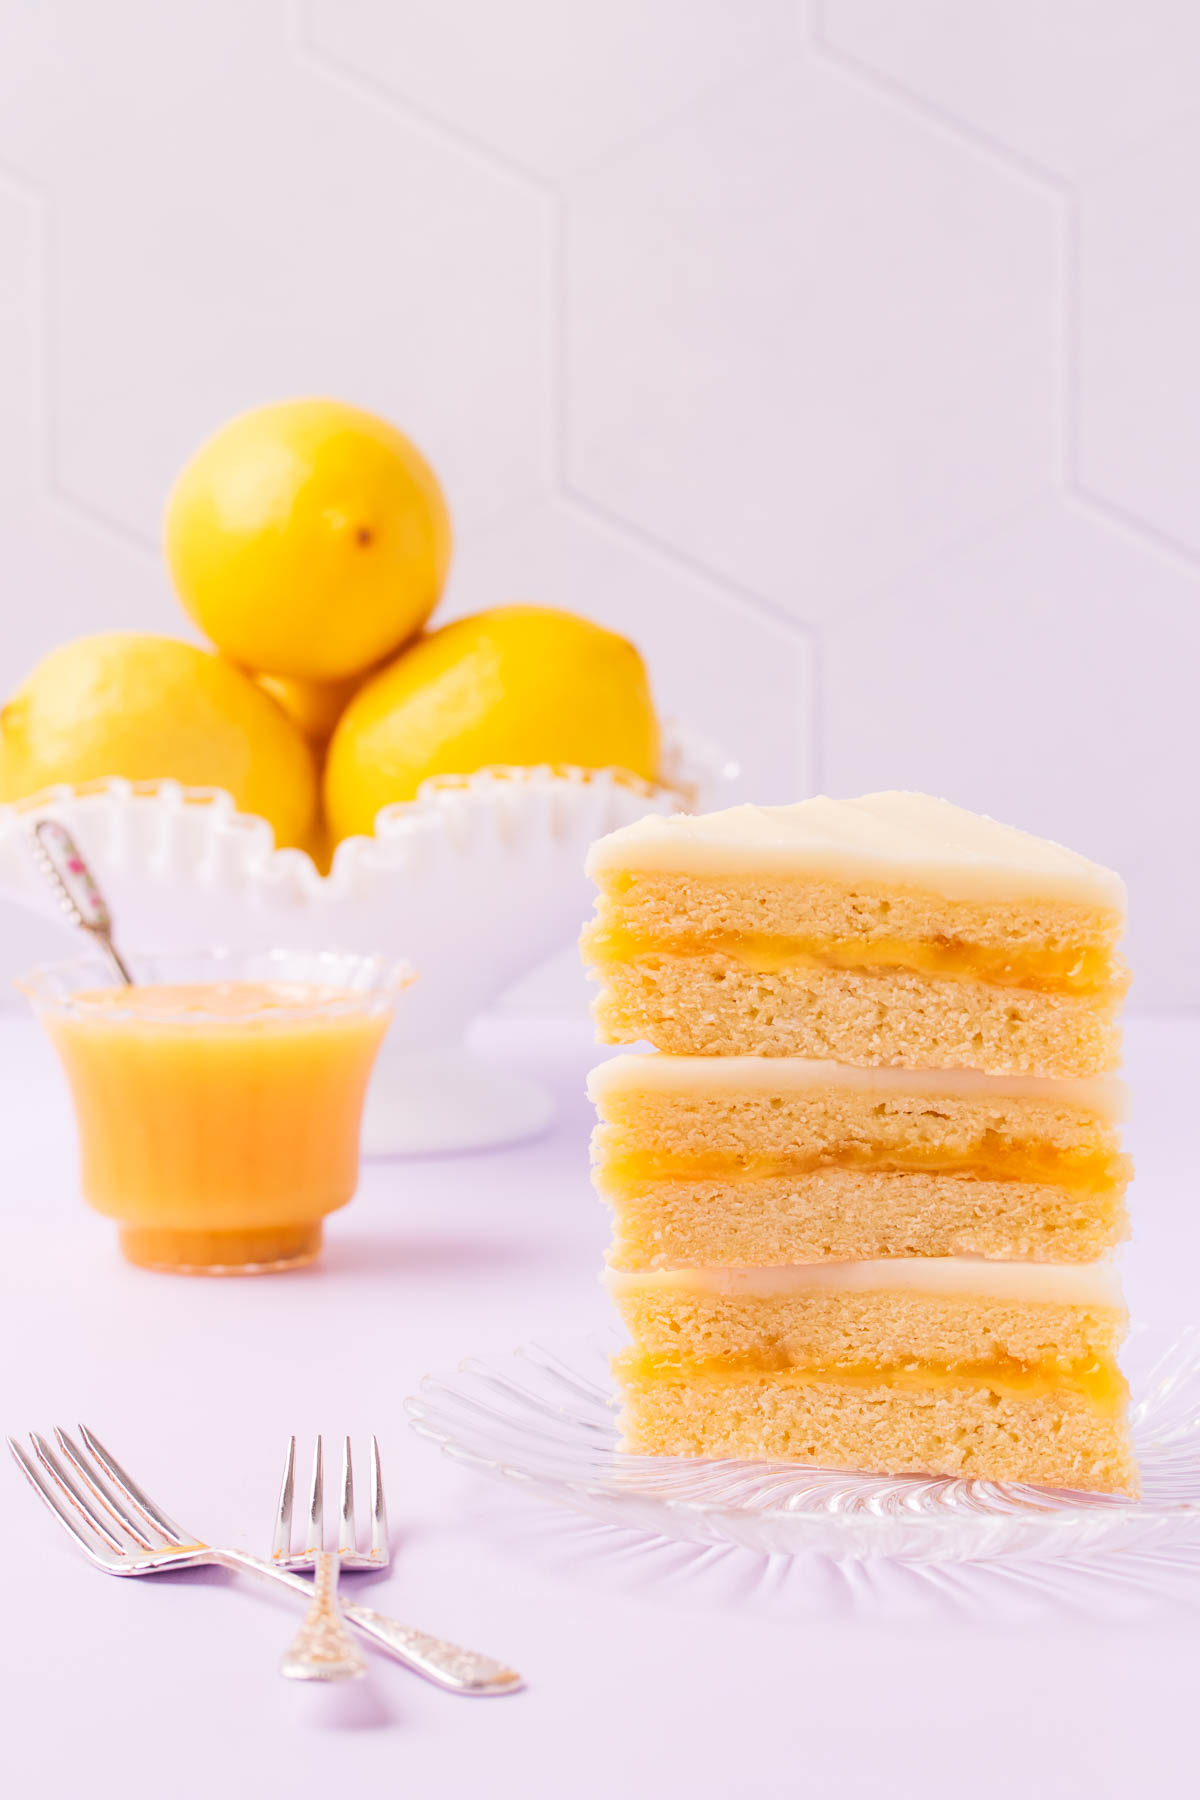 Three triangular pieces of lemon slice stacked on top of each other on a glass plate with a bowl of lemons in the background.